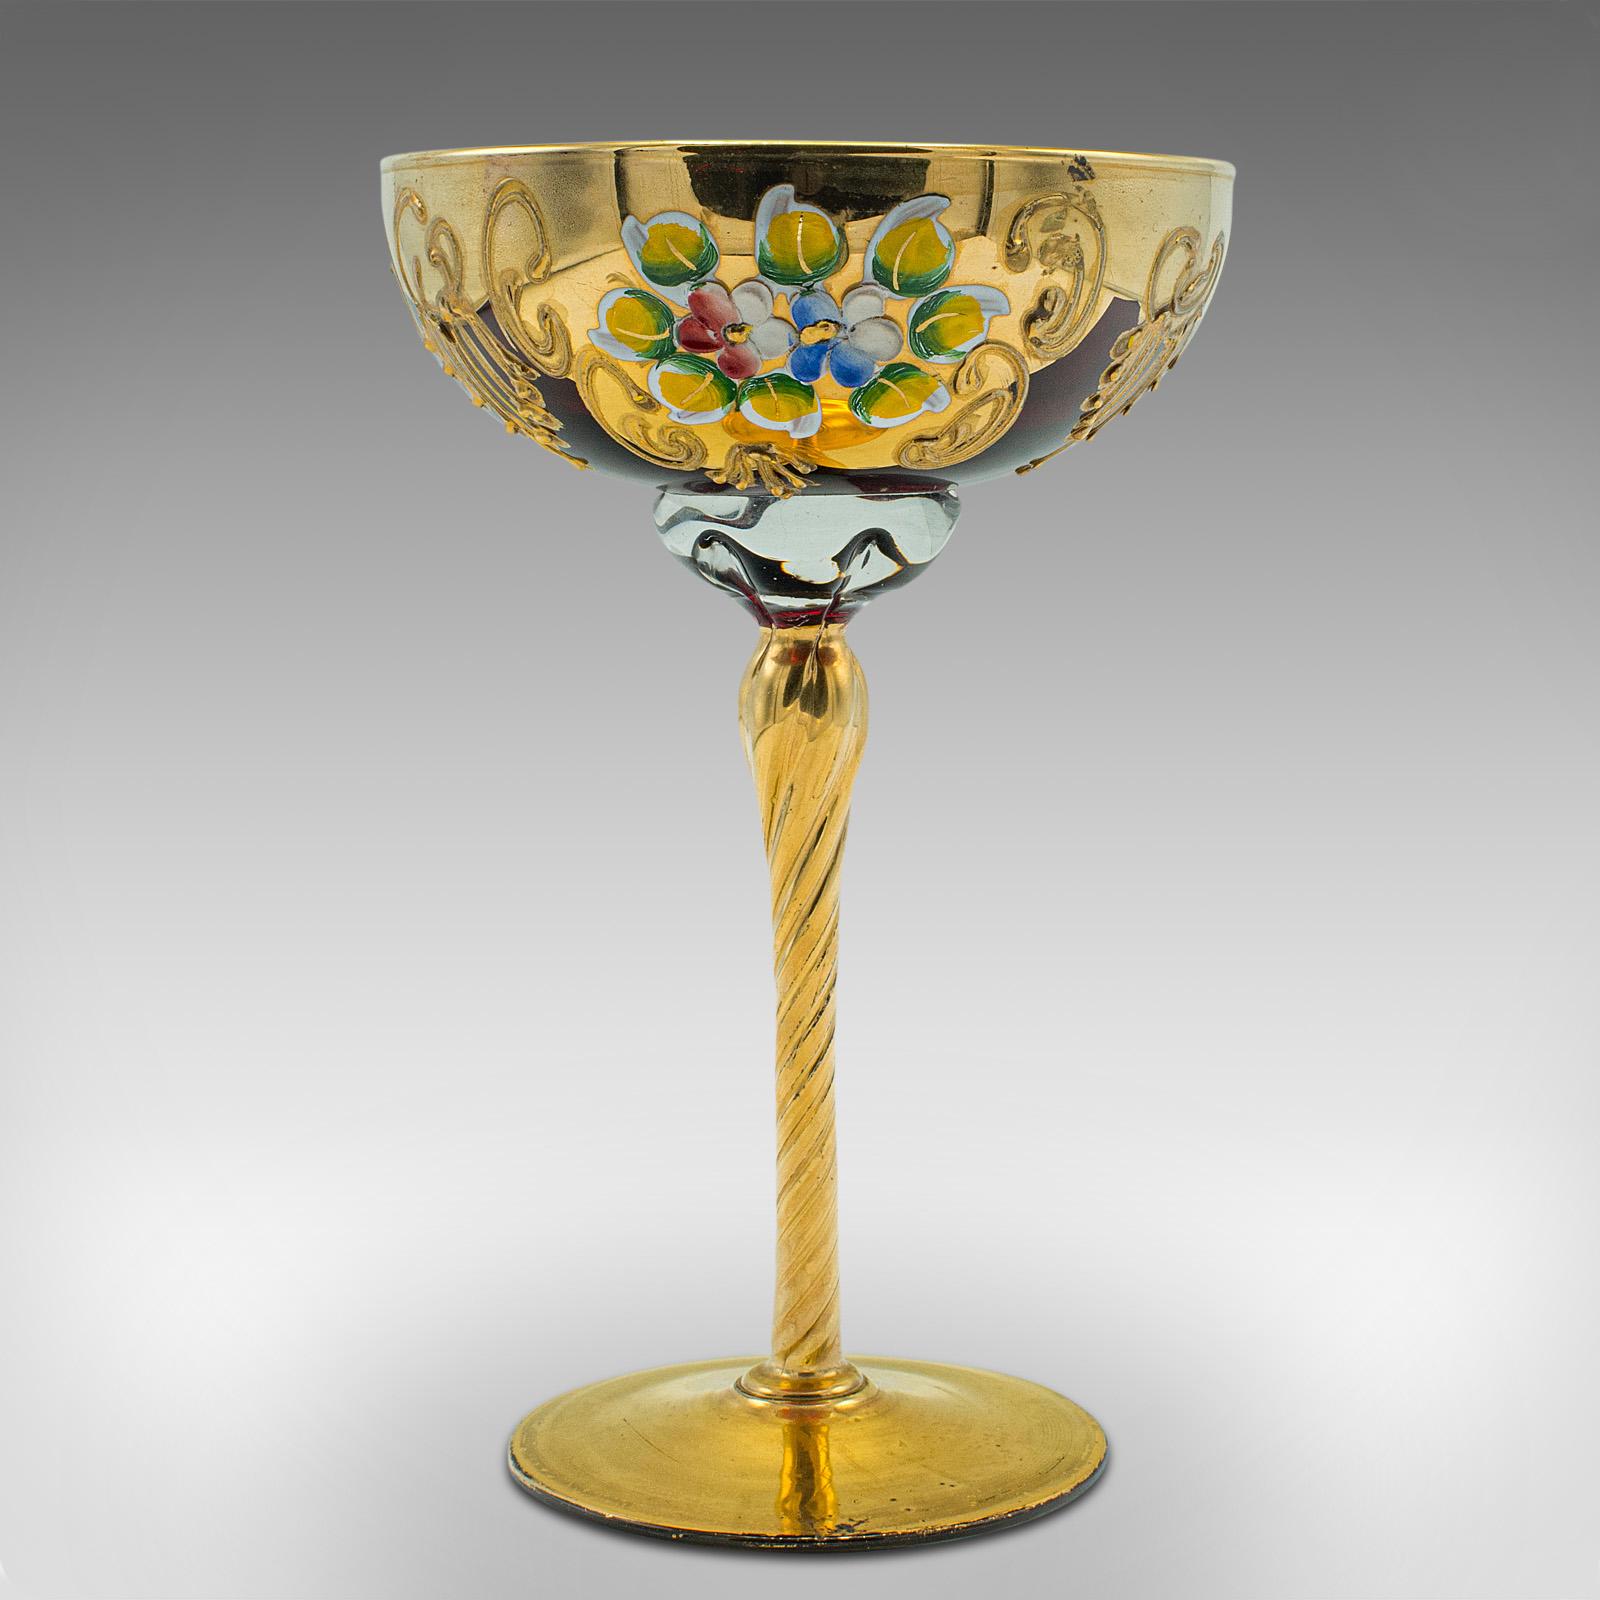 This is a vintage Venetian libation cup. An Italian, art glass and gilt finished decorative wine flute, dating to the late 20th century, circa 1970.

Raise a glass with this striking libation cup
Displays a desirable aged patina and in good